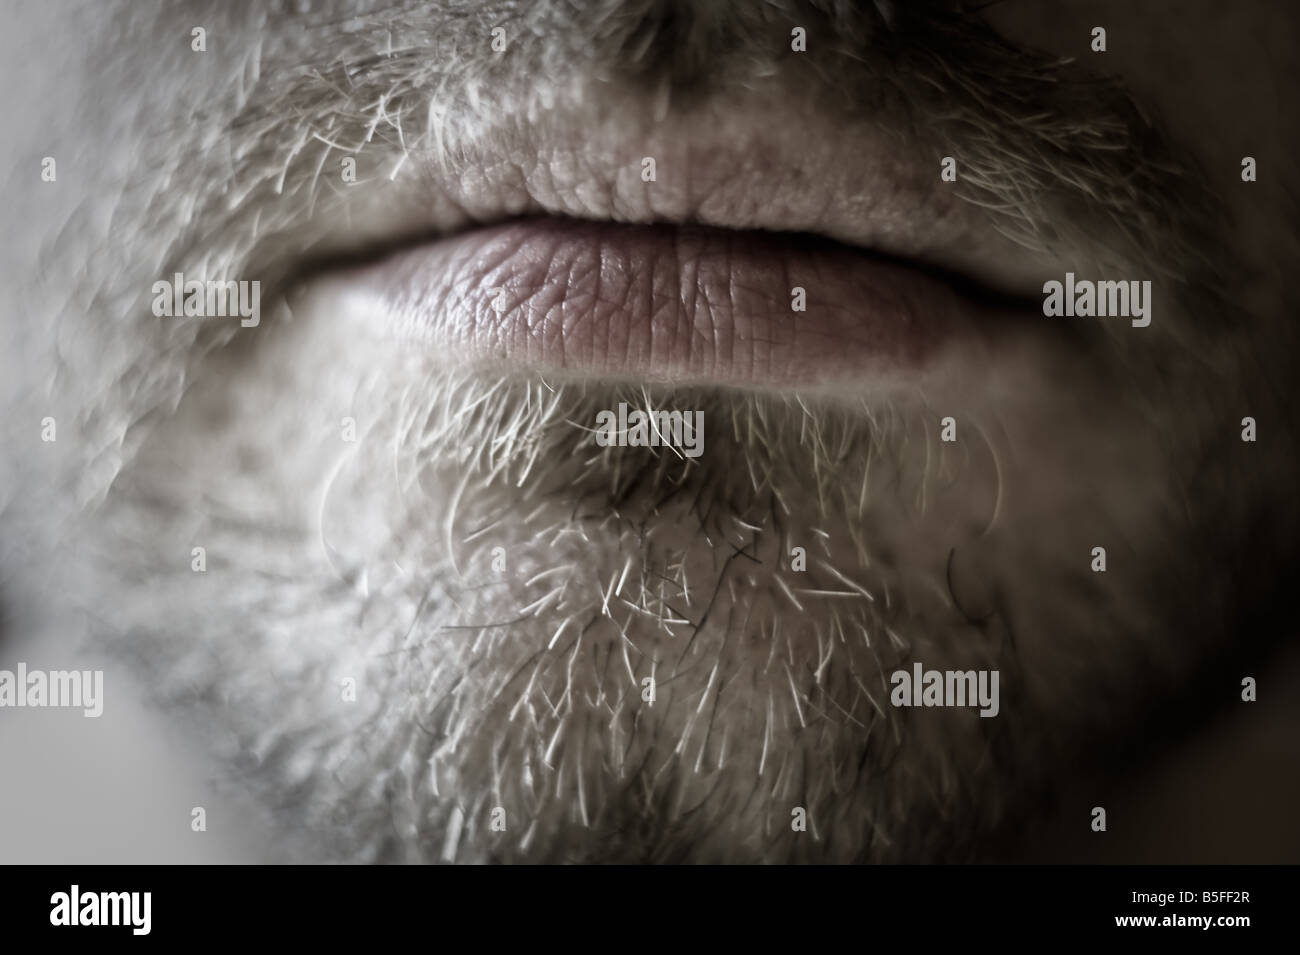 Closeup of down part of bearded man s face Stock Photo